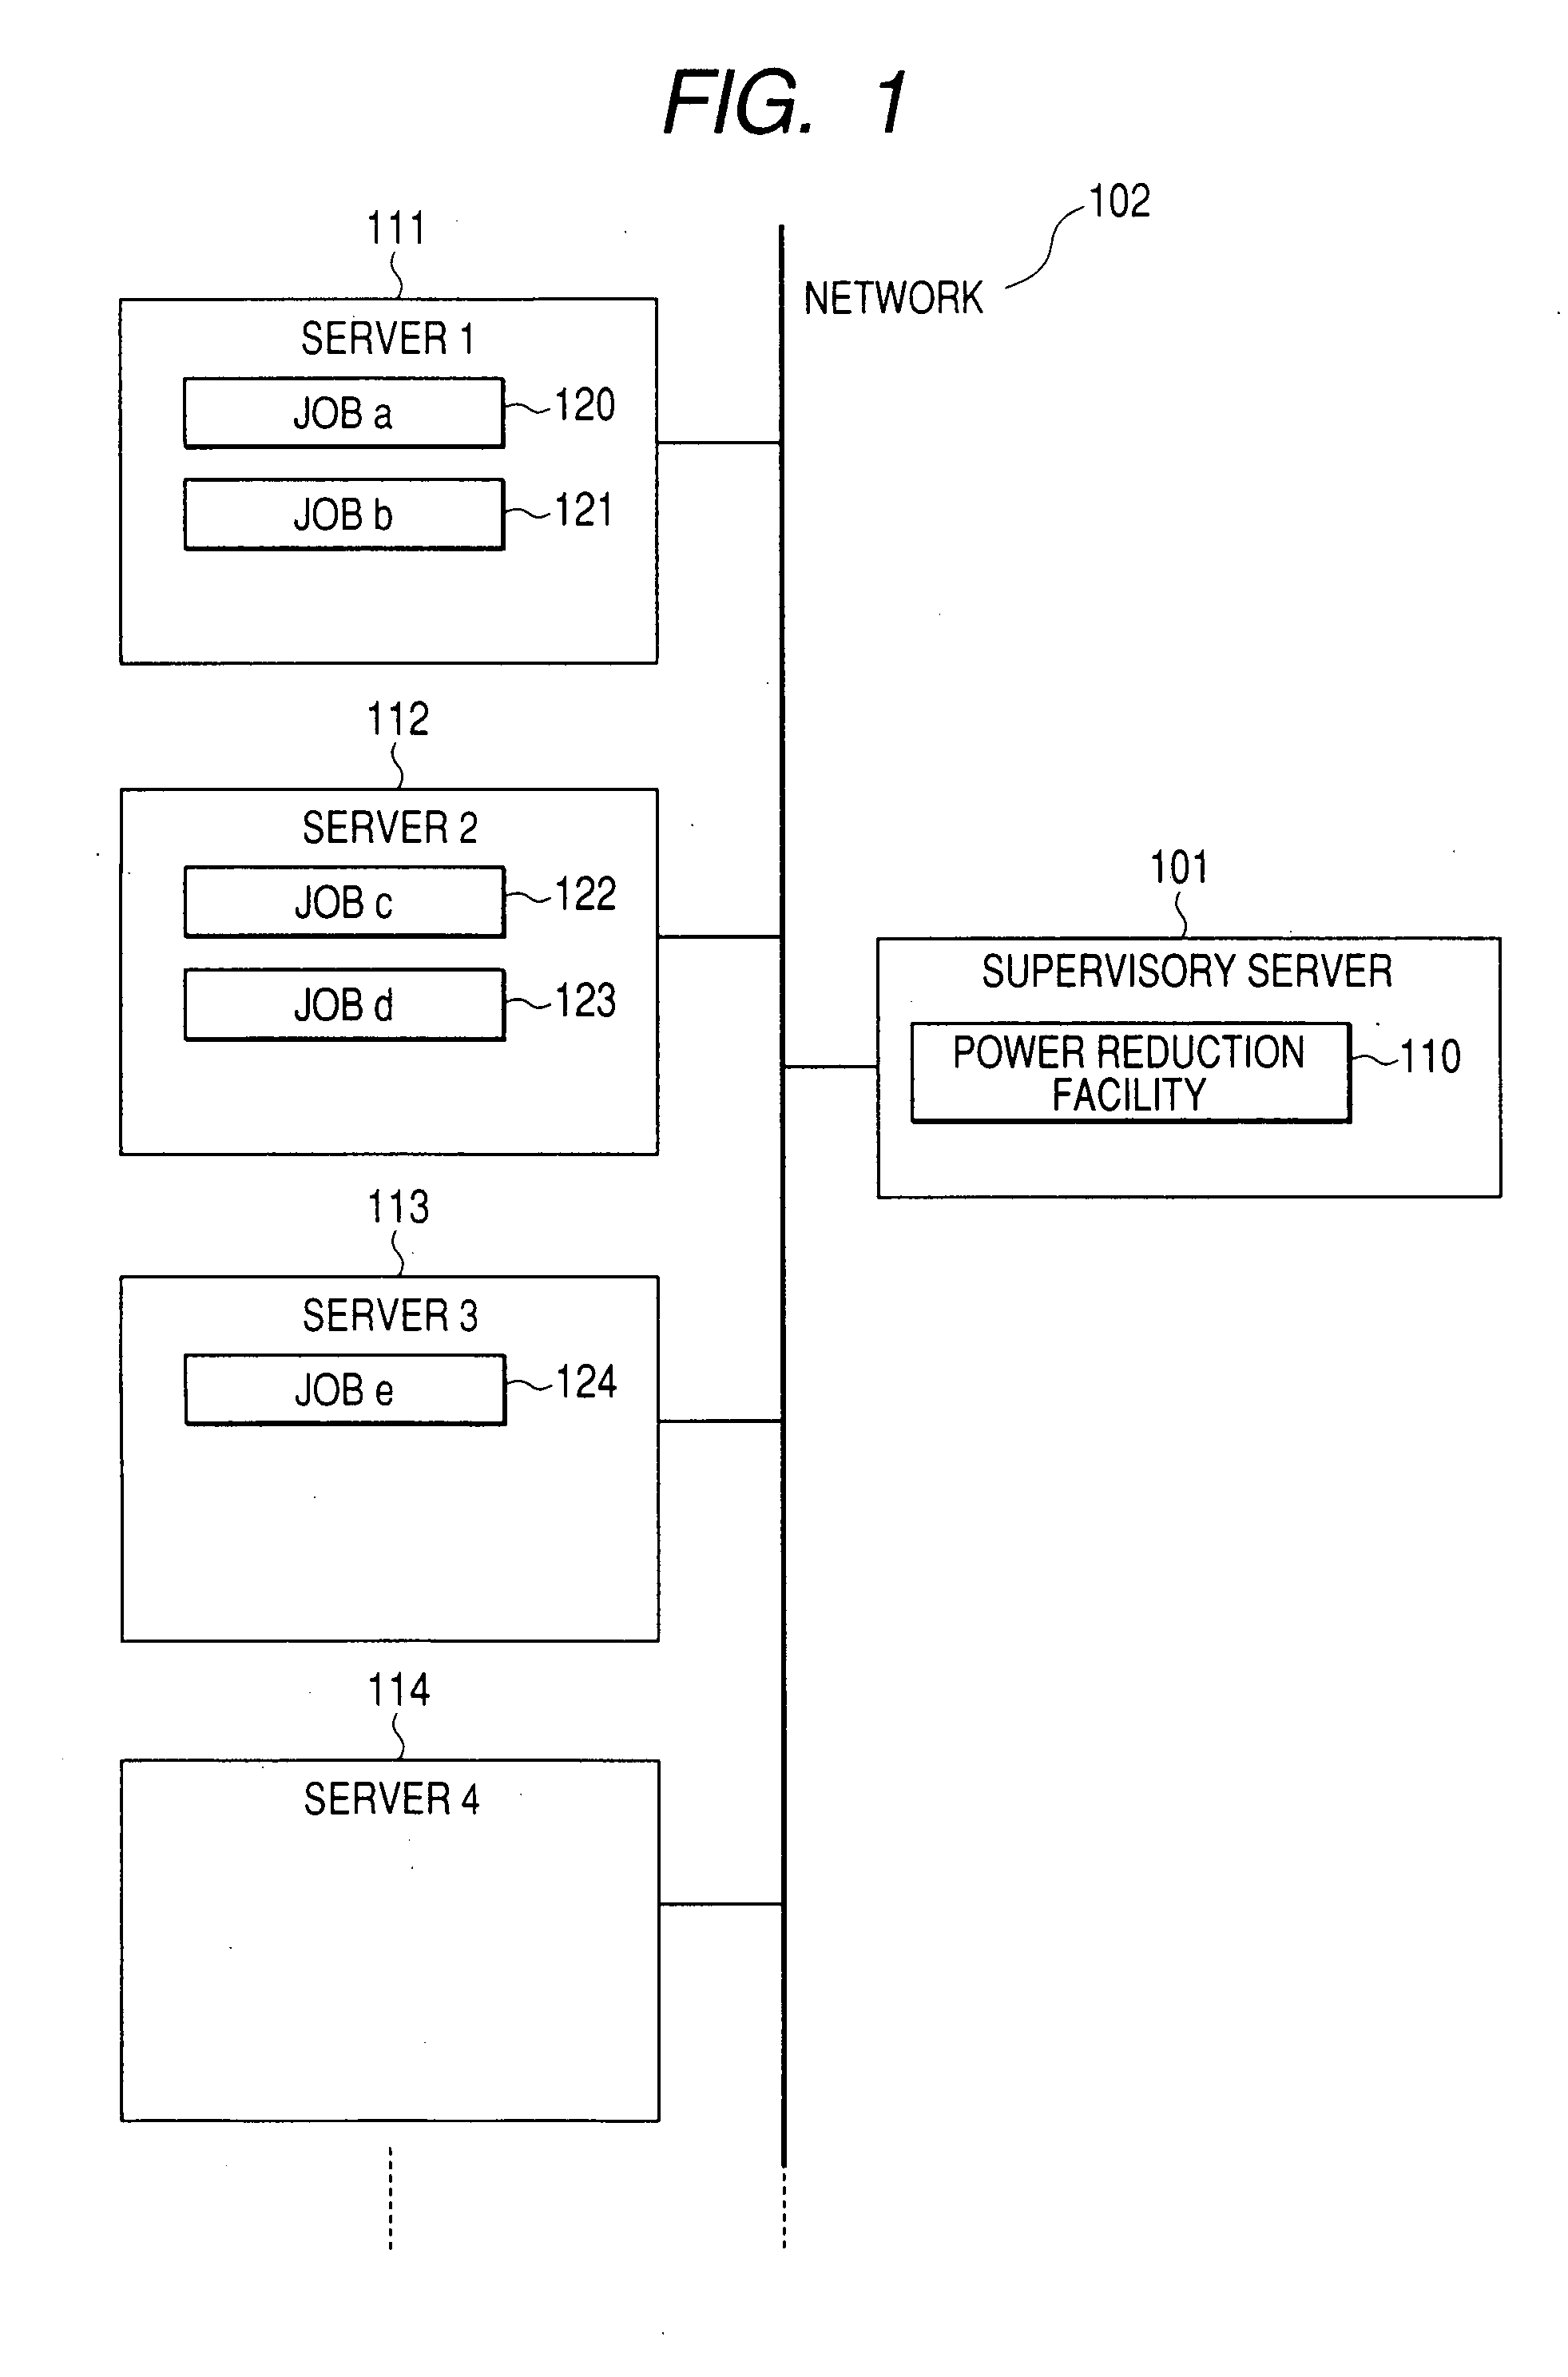 Method and computer program for reducing power consumption of a computing system